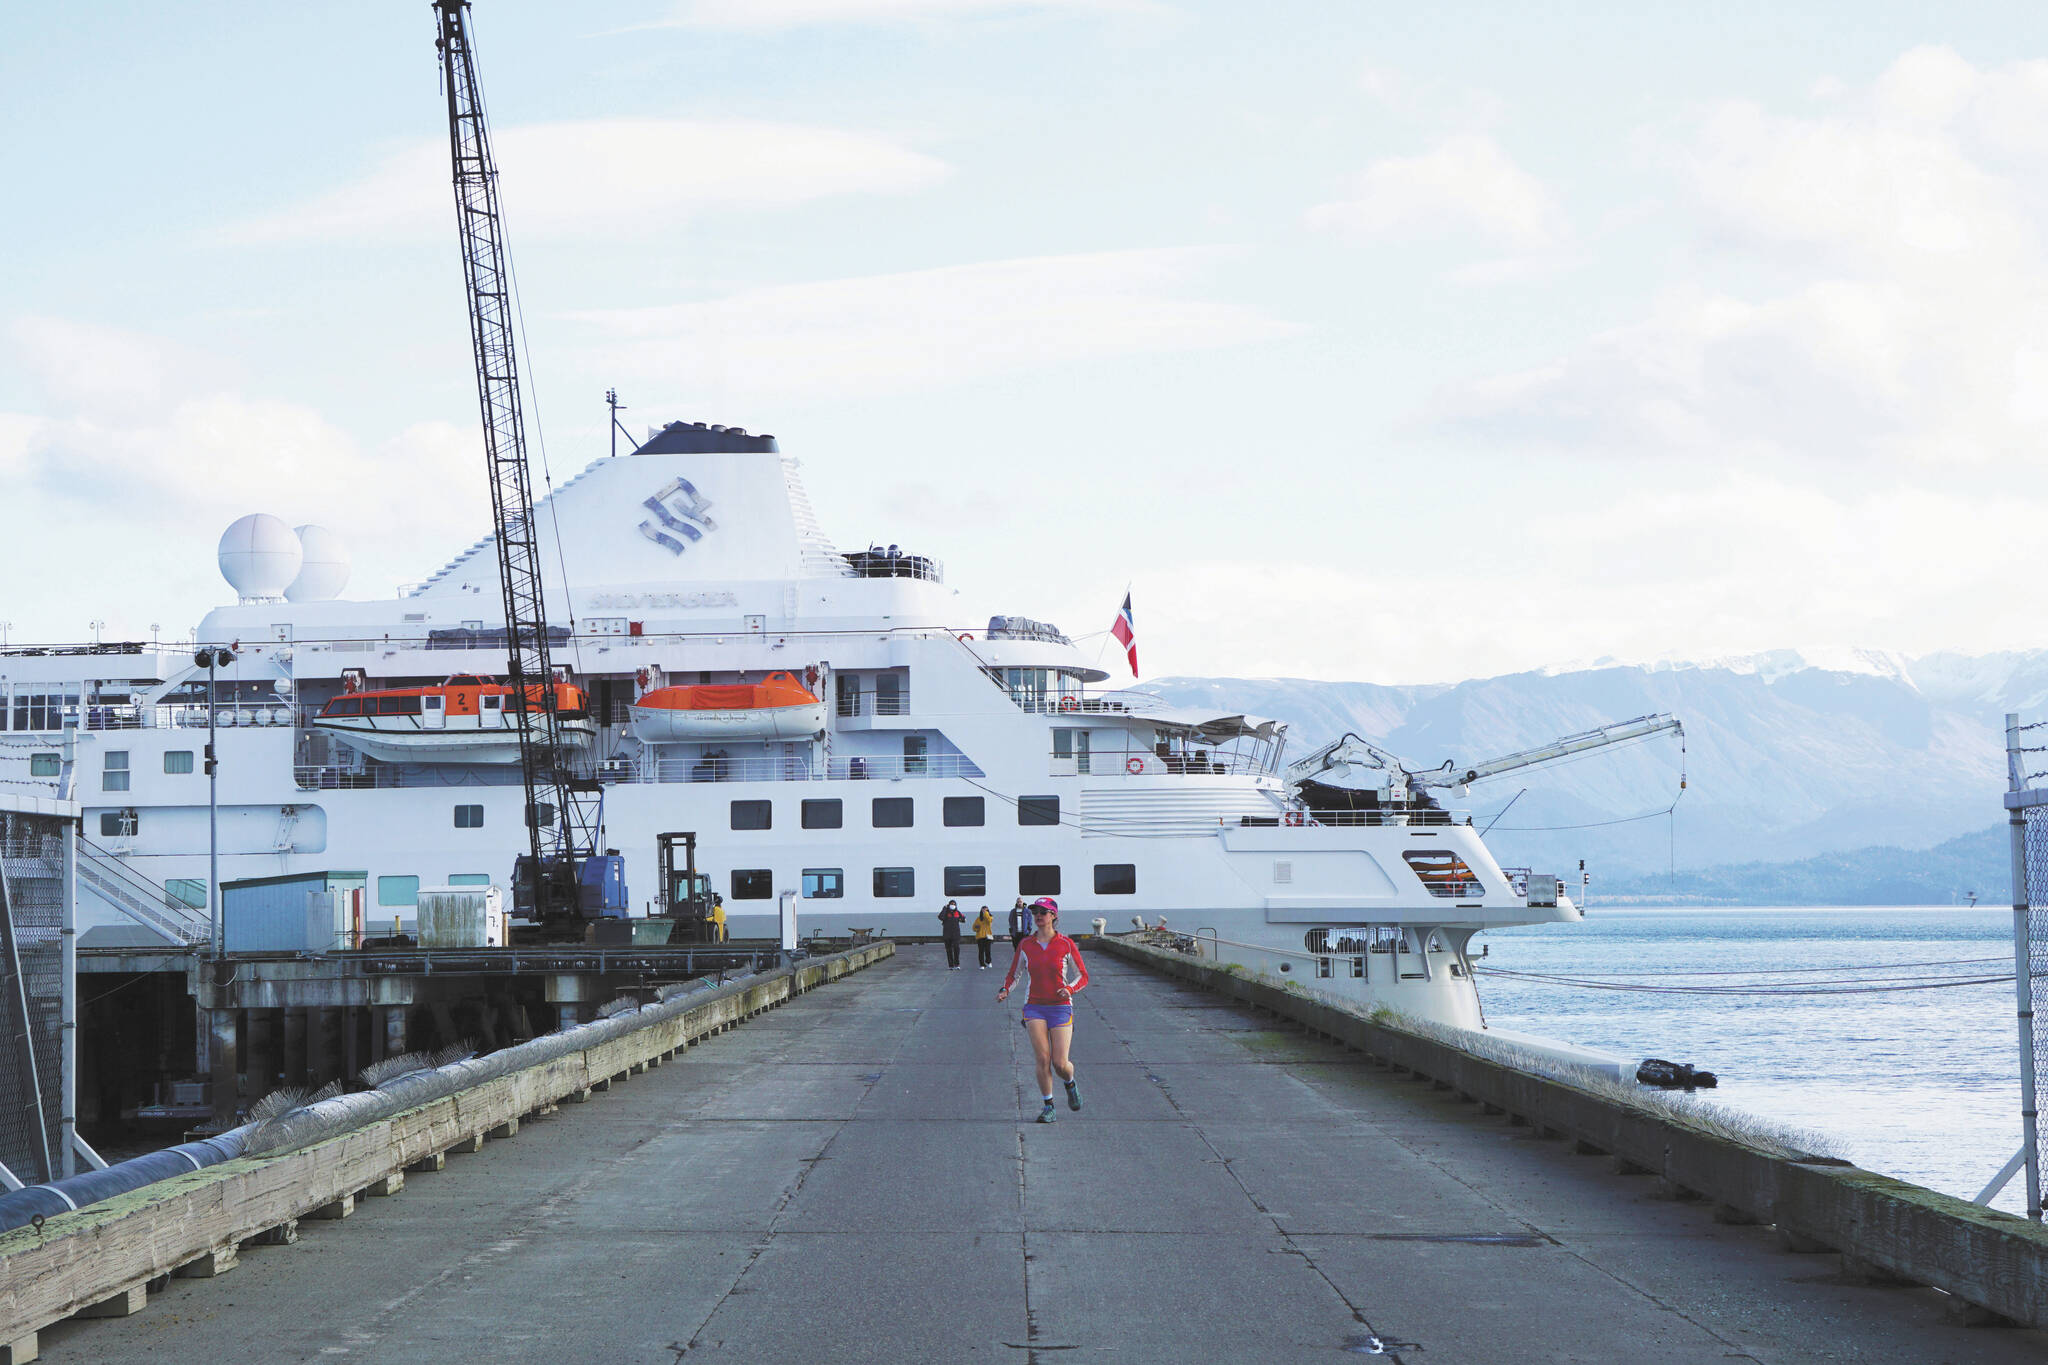 Photo by Michael Armstrong/Homer News
A jogger leaves the Silversea cruise ship Silver Wind at the Deep Water Dock on Sunday, Sept. 25, in Homer.